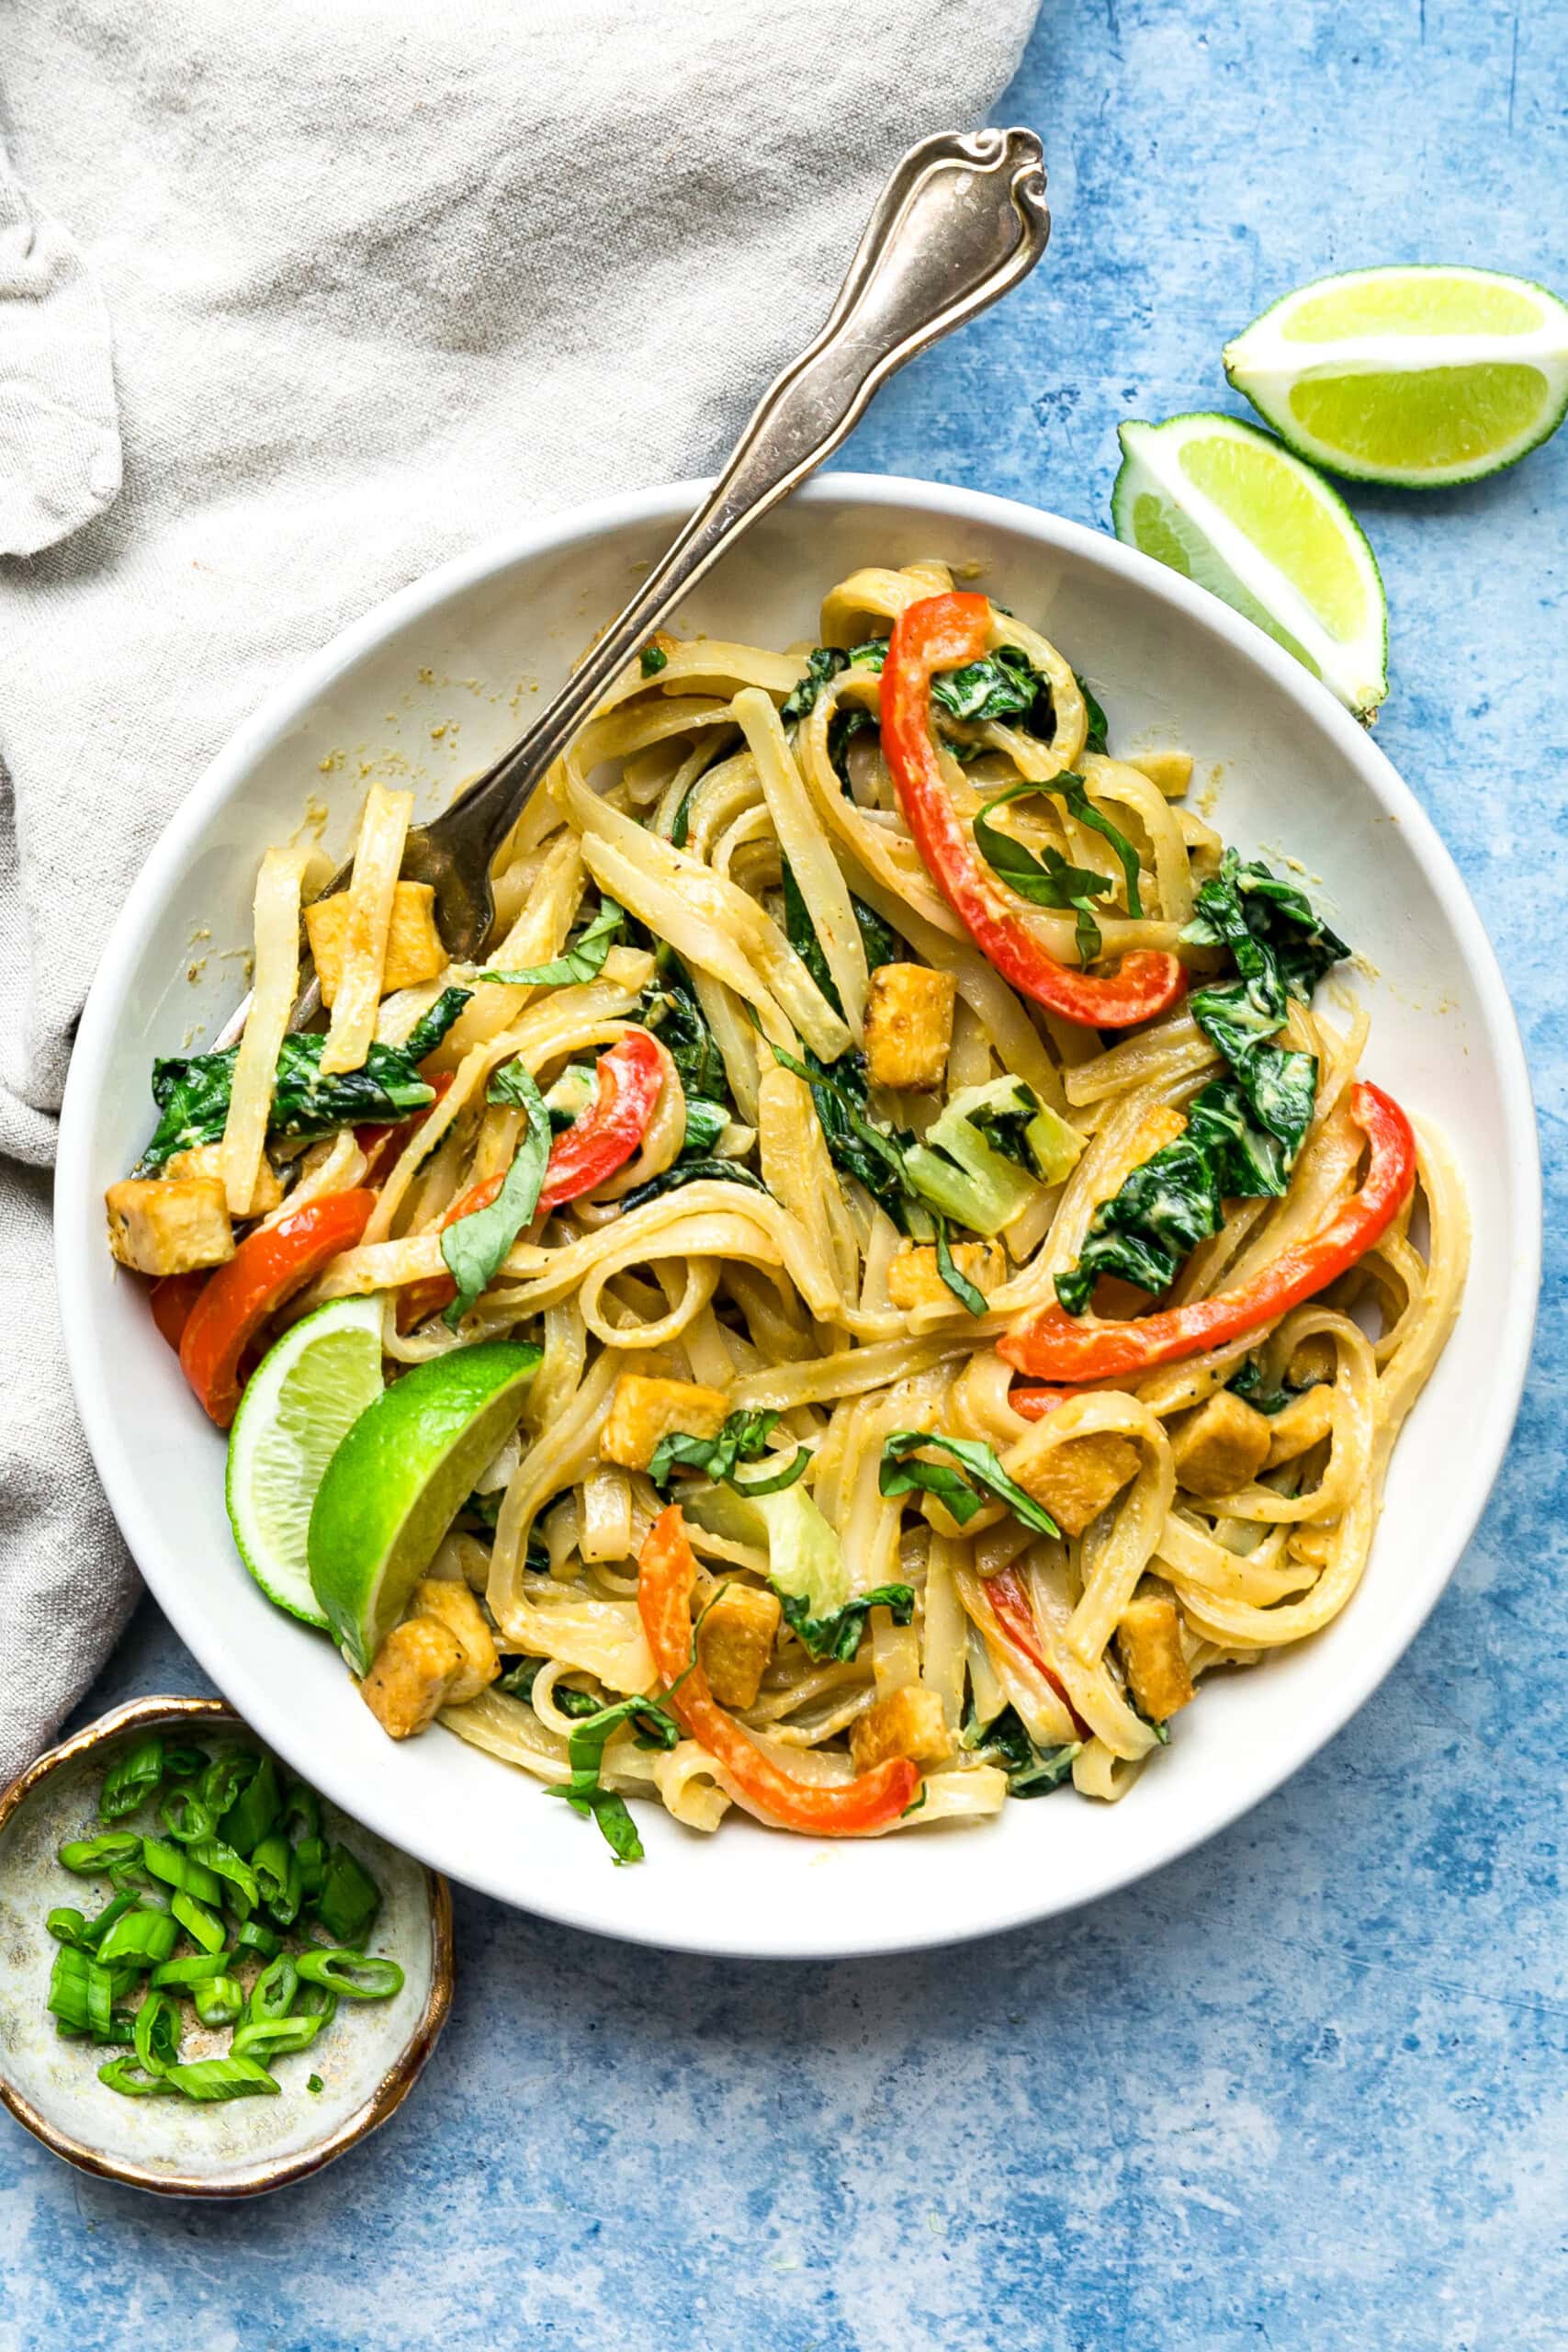 Green Curry Noodles in a bowl with limes.